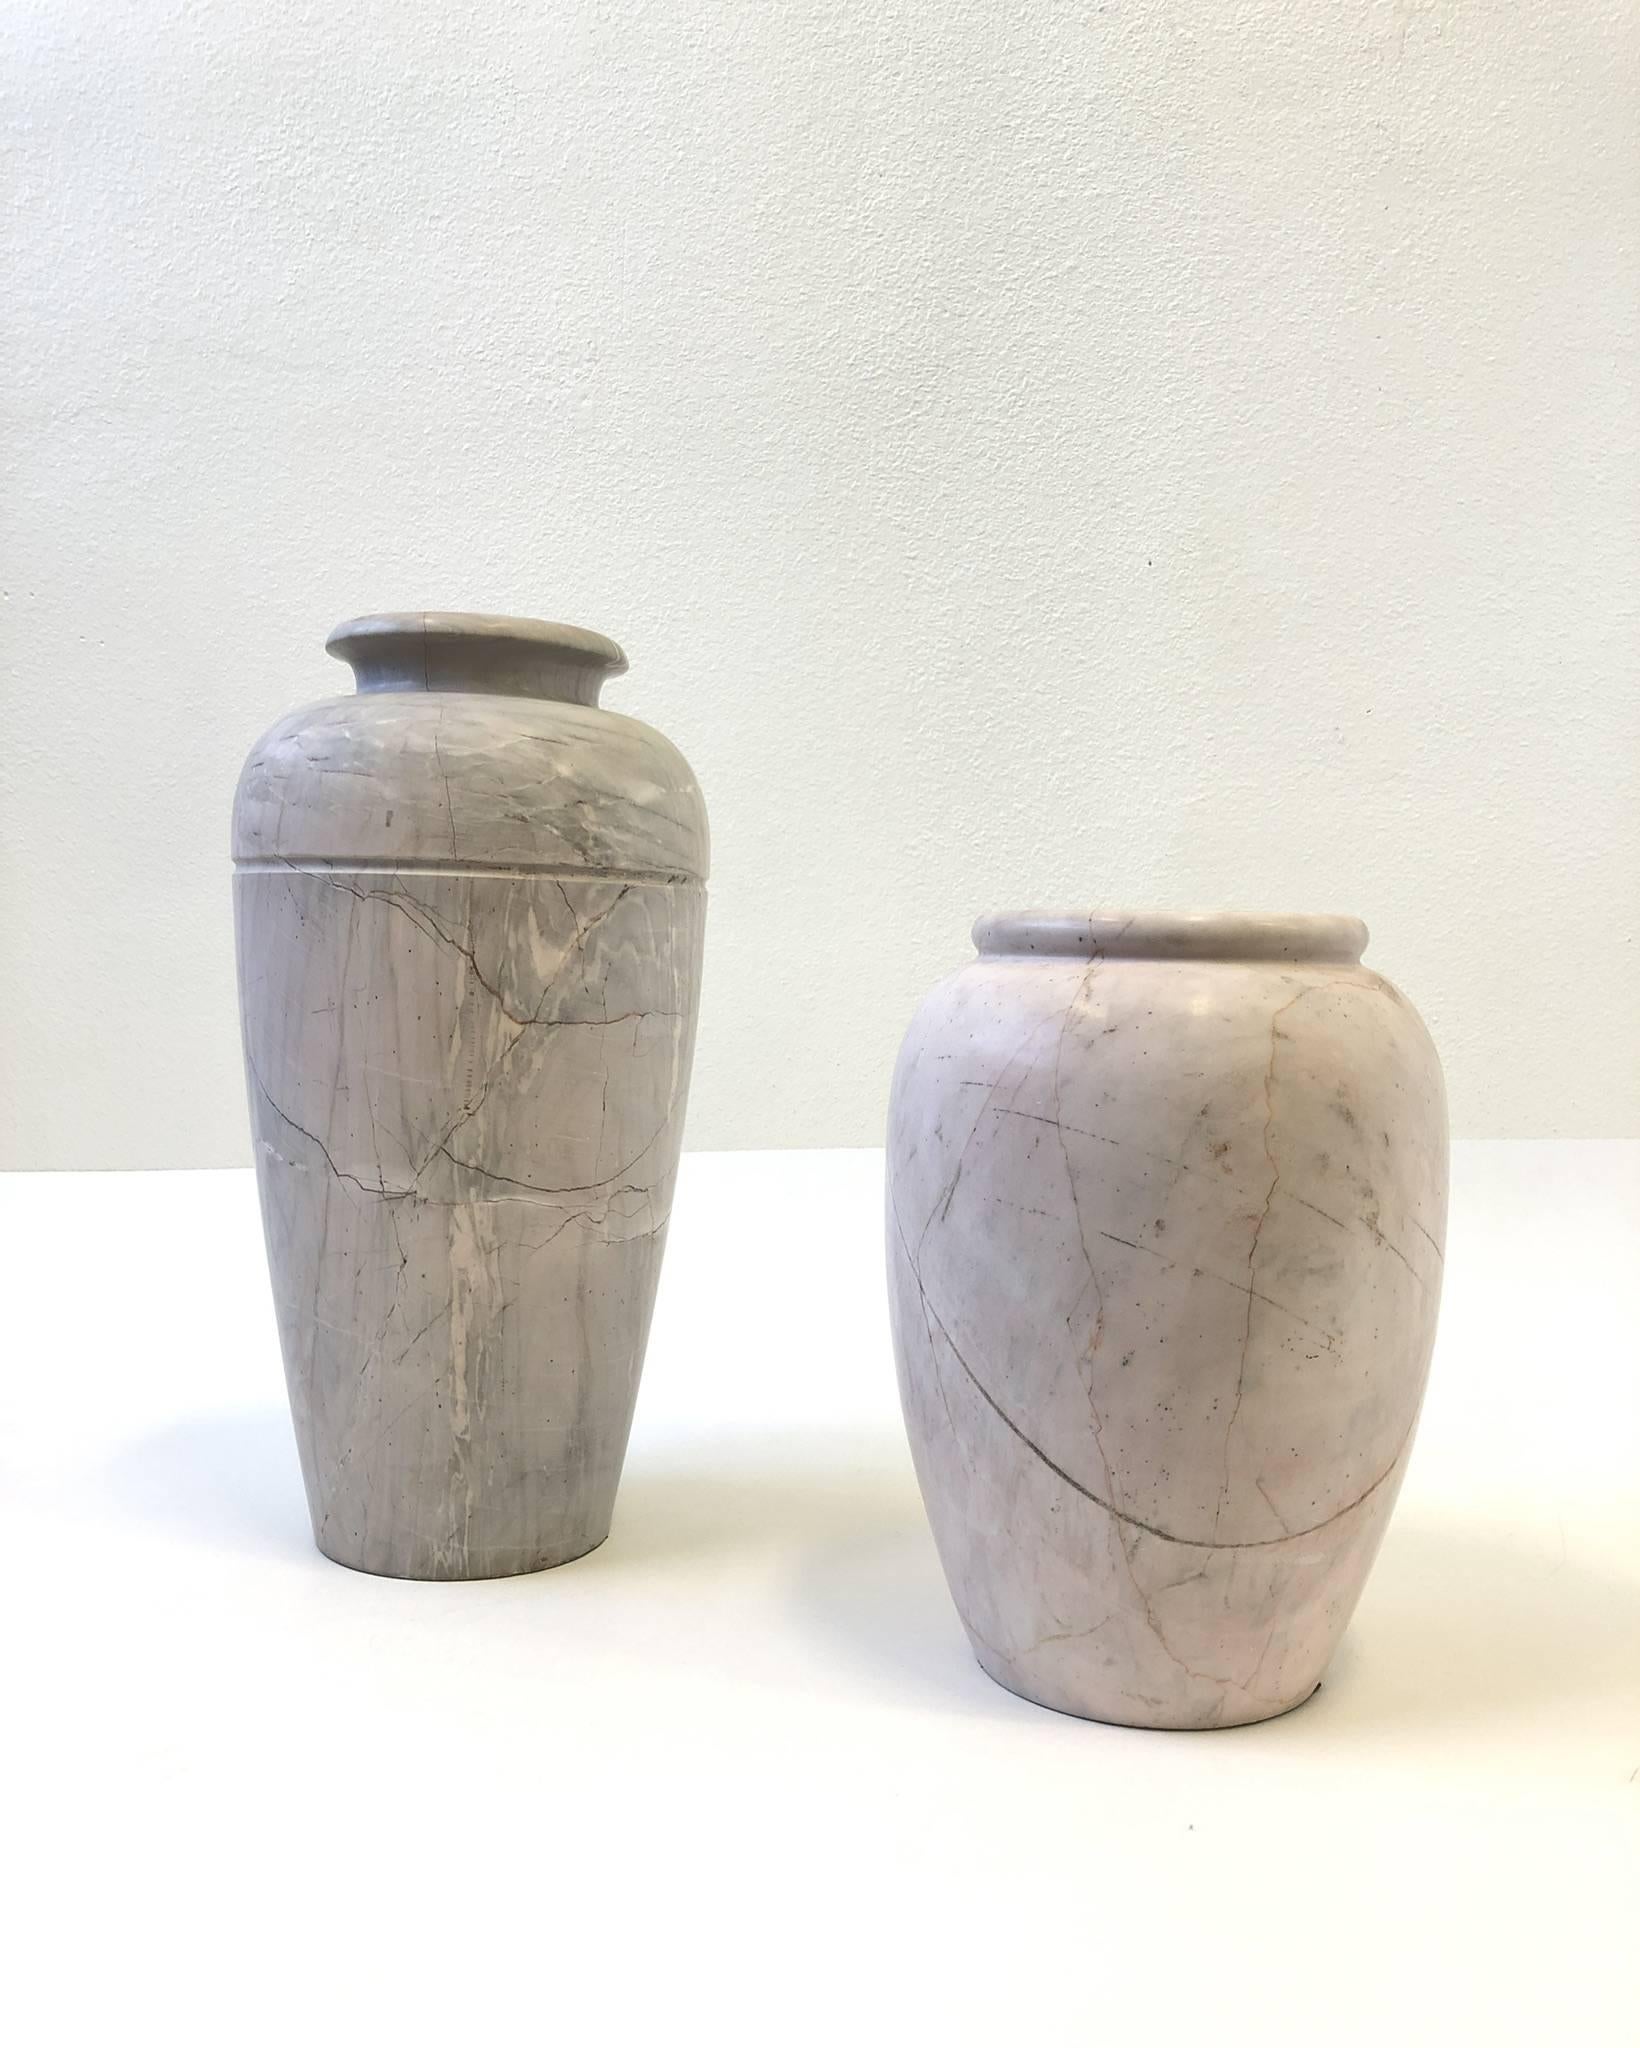 A beautiful pair of carved and polished Italian marble vases from the 1980s.
The larger one has is light gray with a little blush. The smaller one is a blush pink color.
Dimensions: Large 20” high and 10” diameter. Small 14” high and 10” diameter.